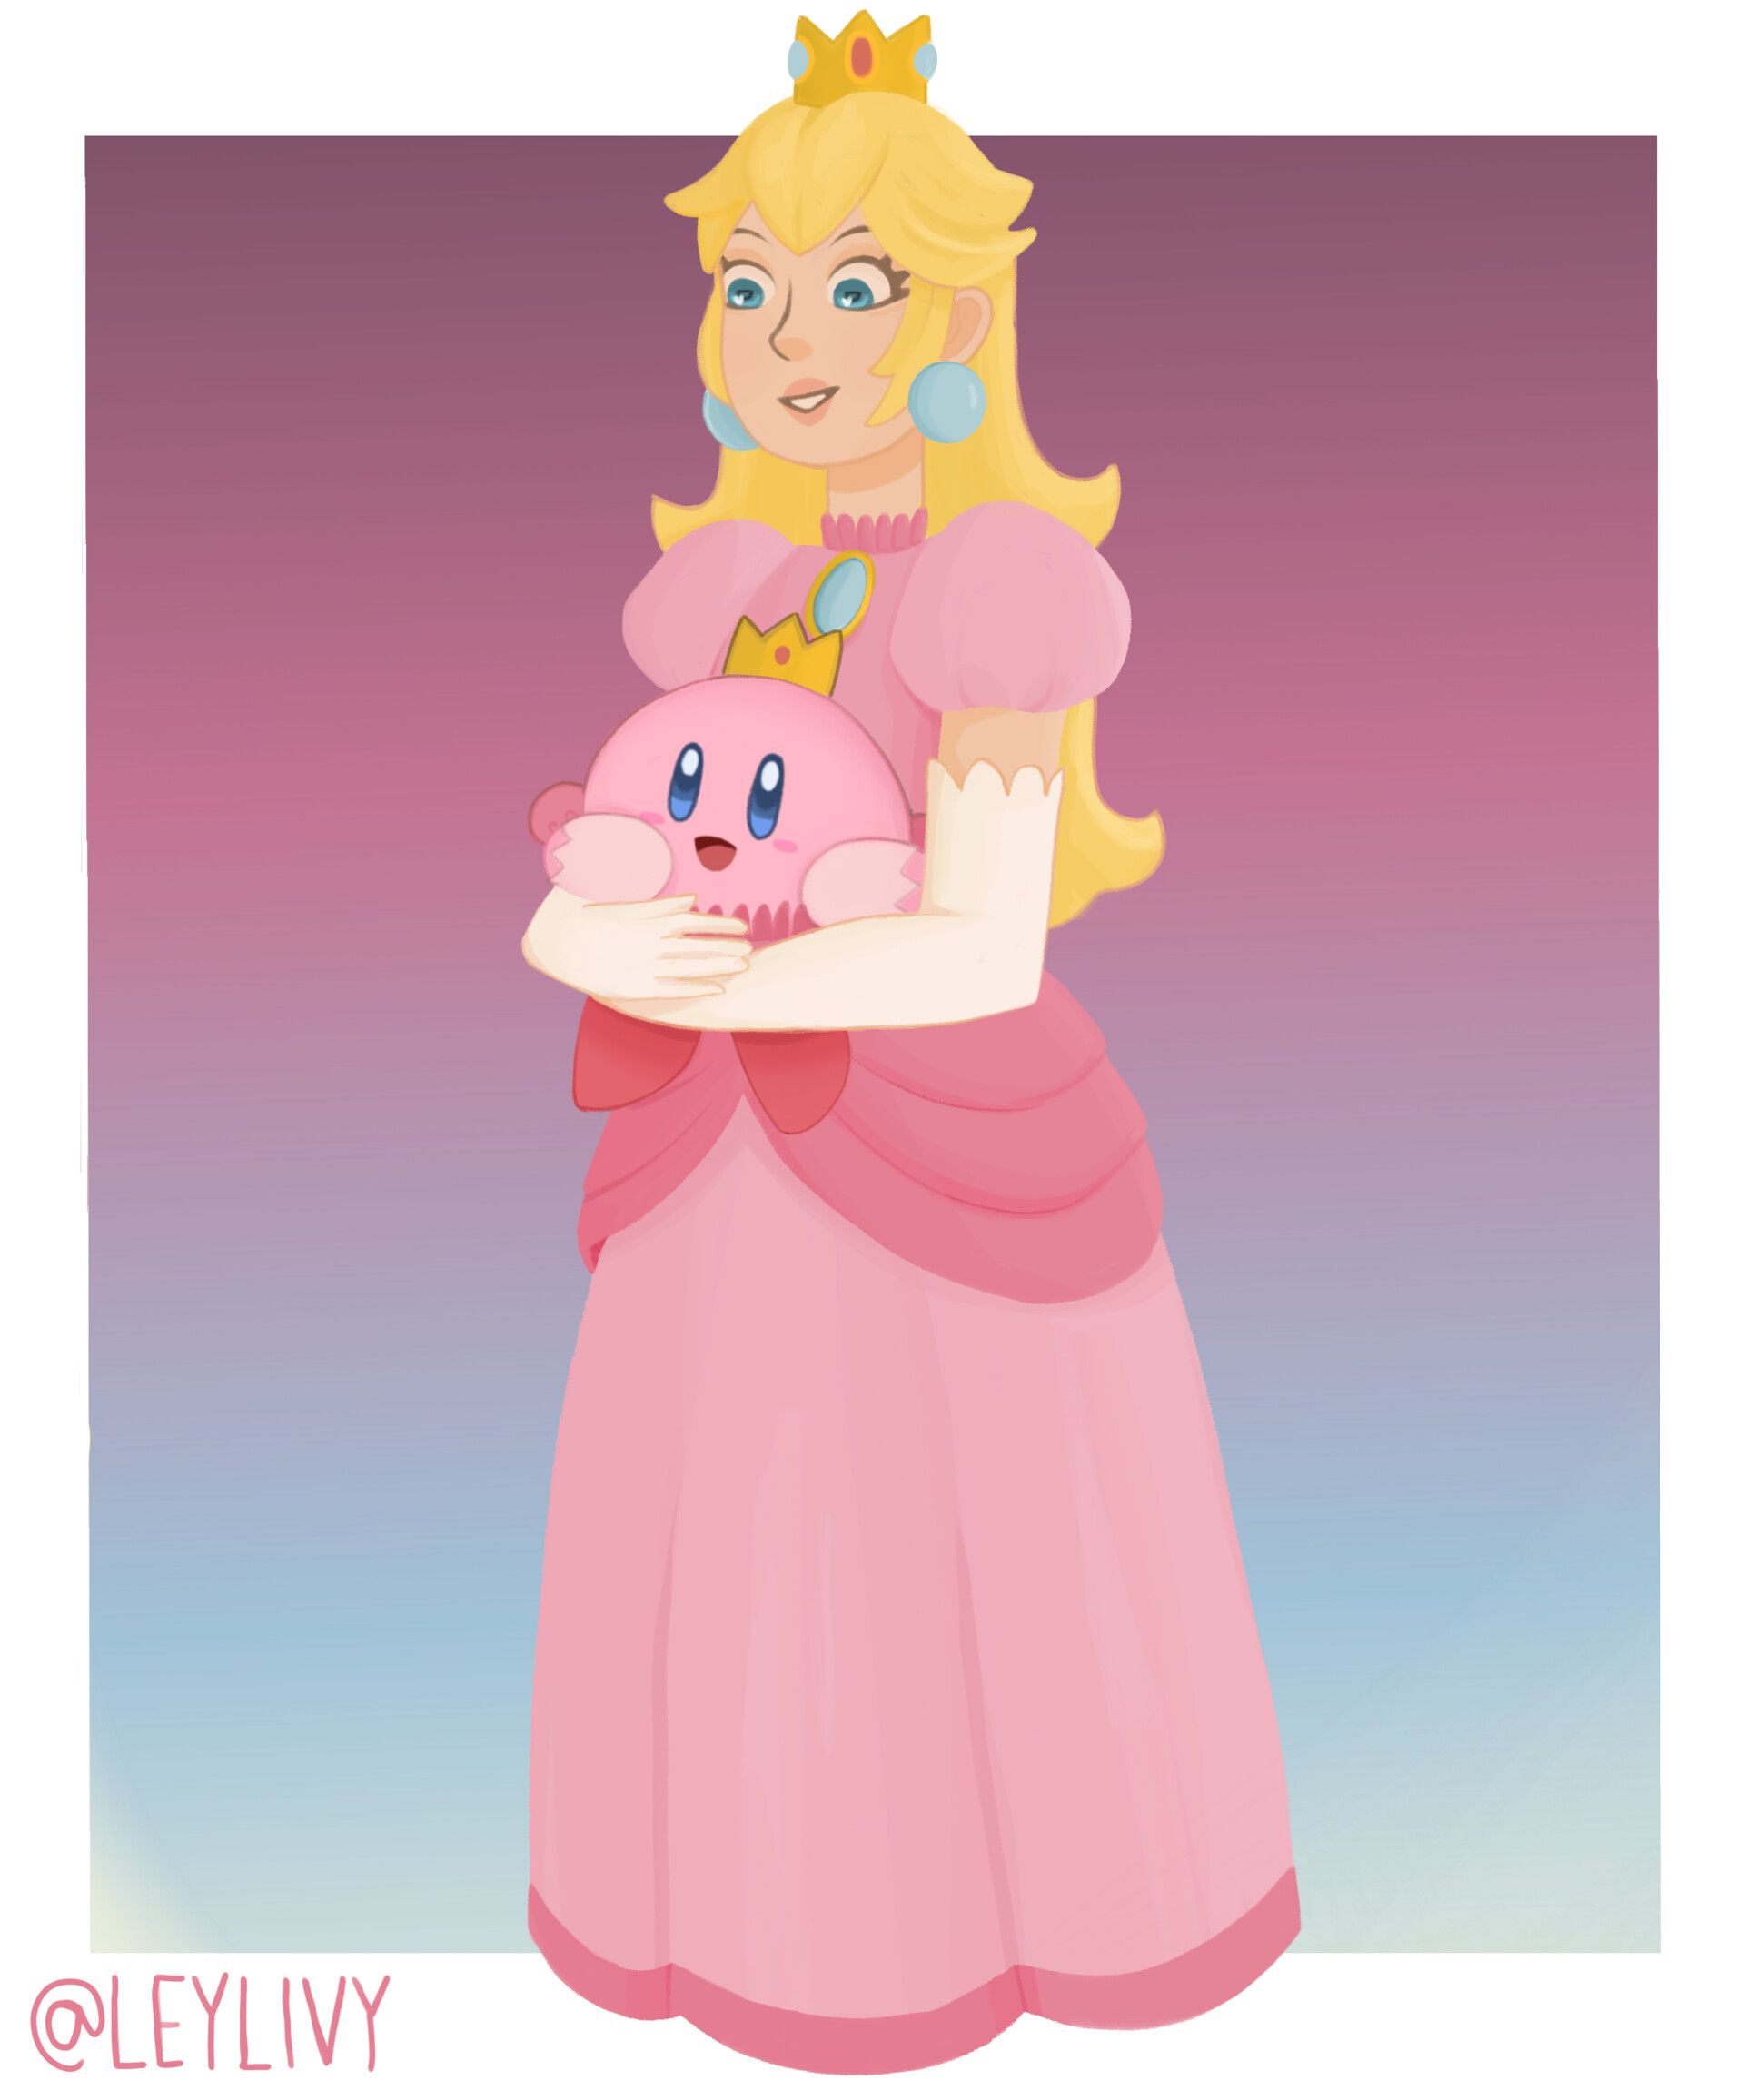 A cartoon character in pink dress holding something - Princess Peach